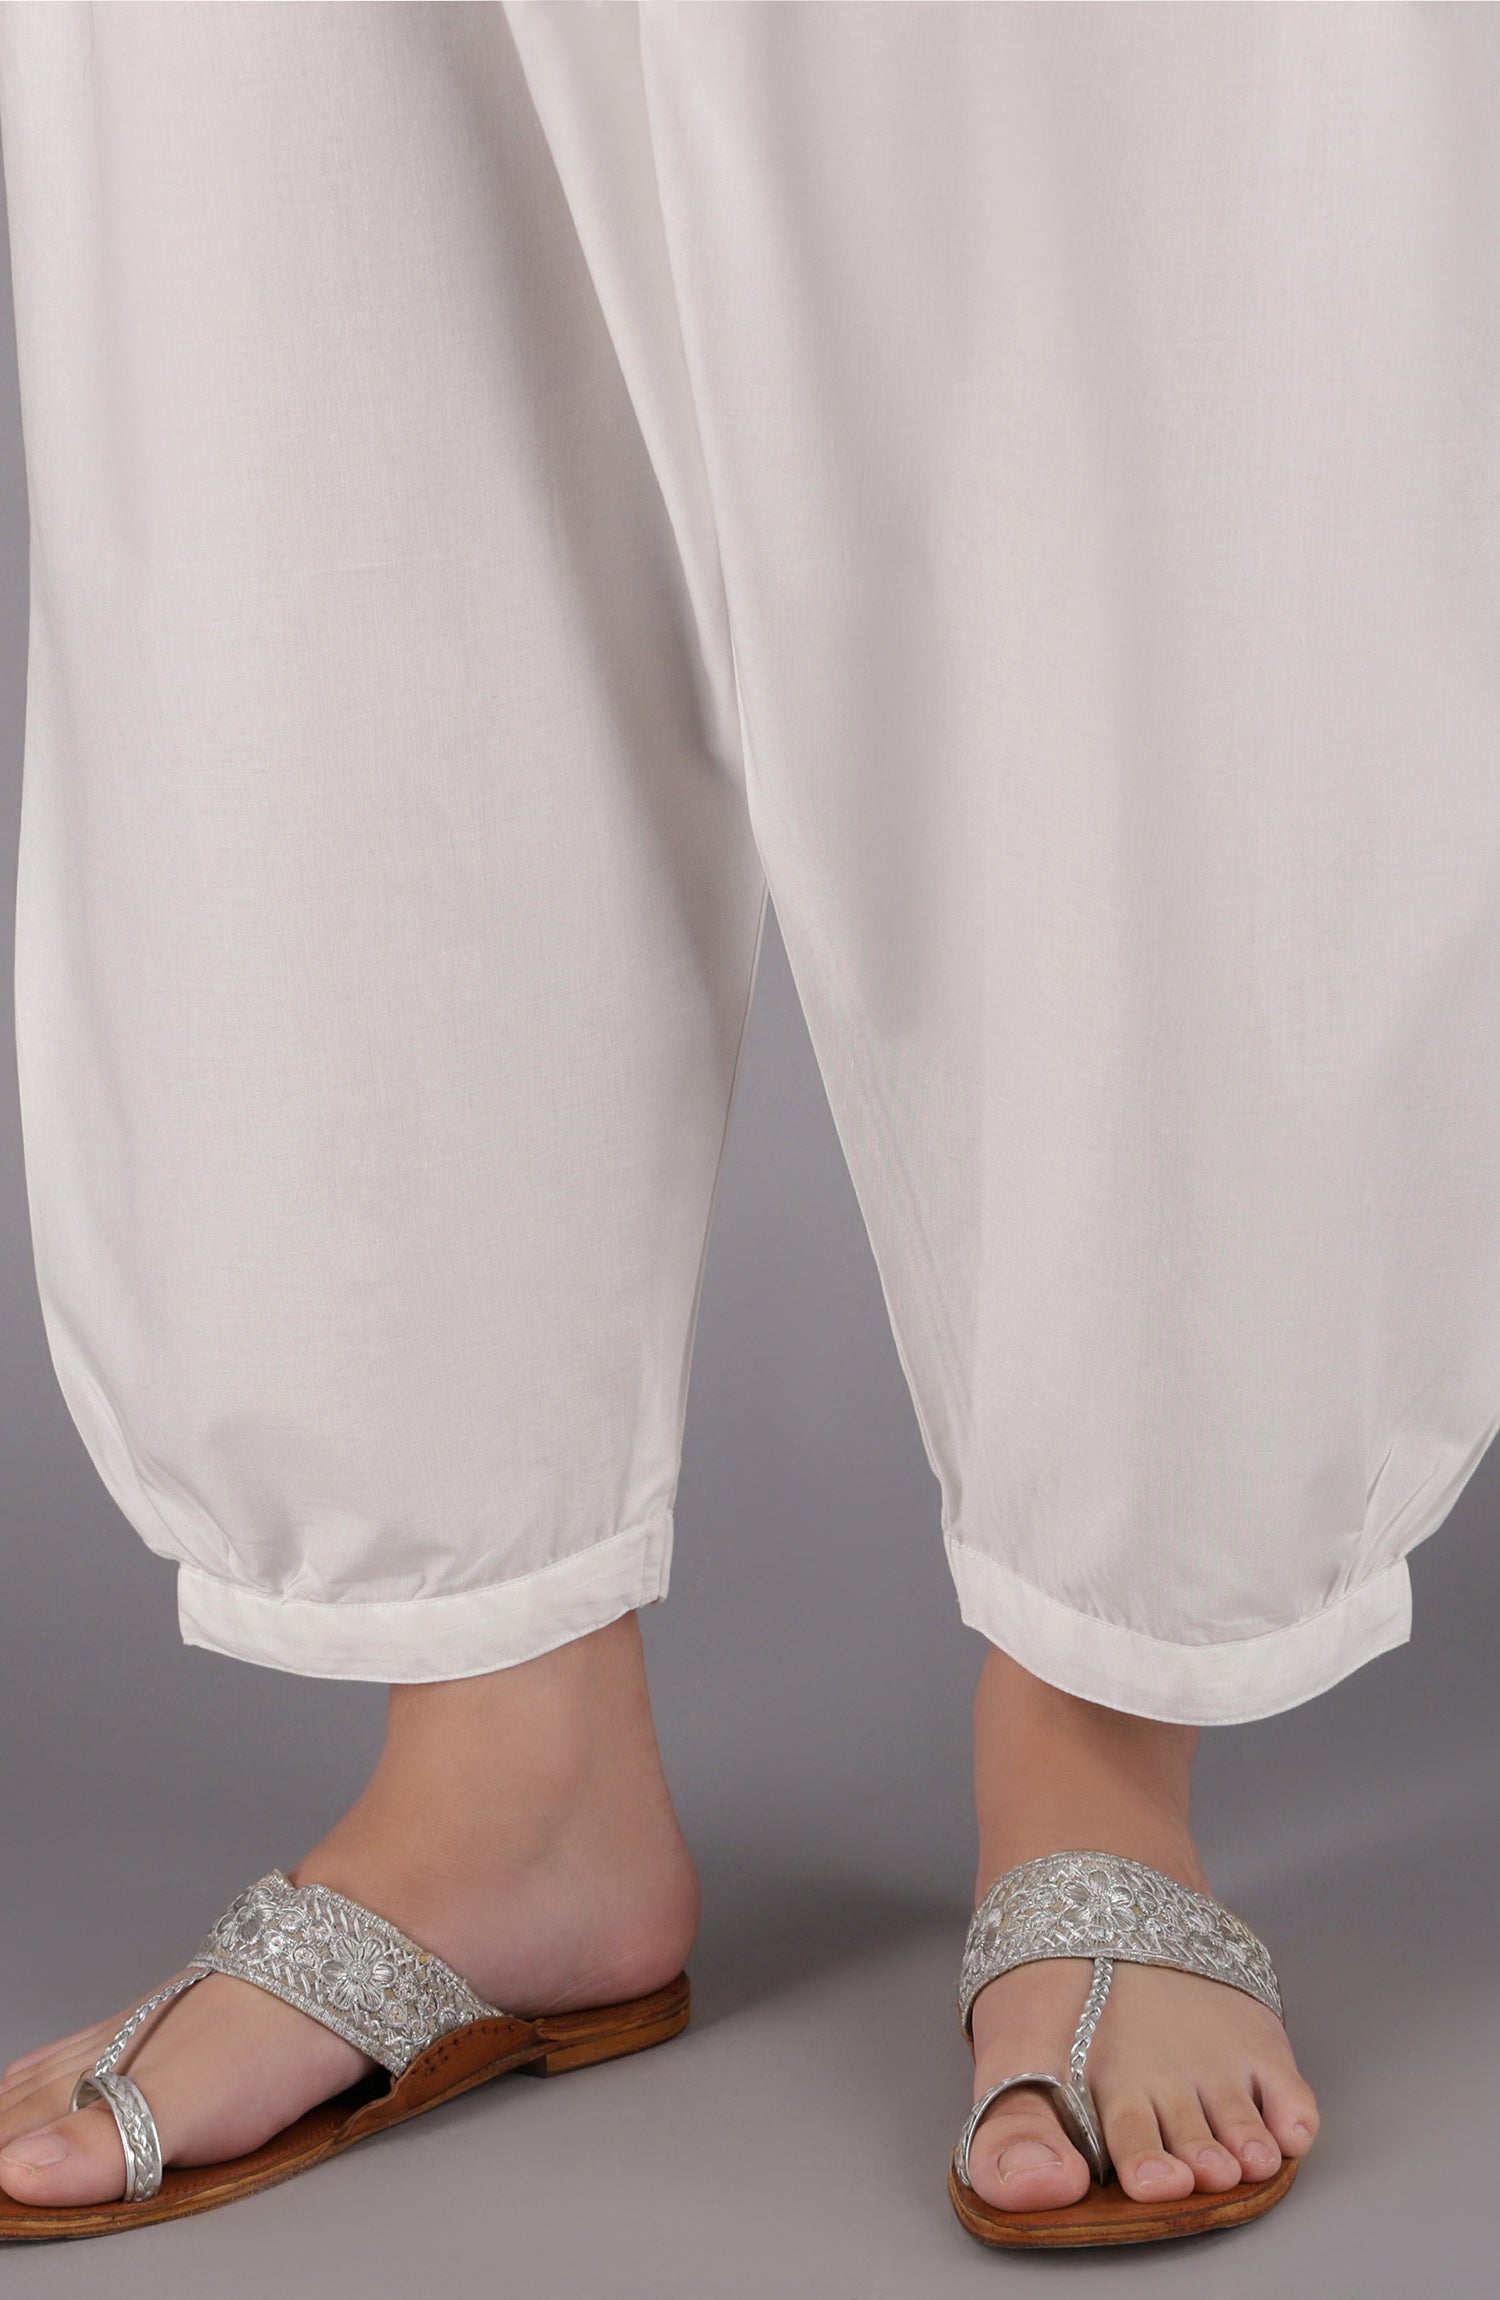 NRP-94/S WHITE CAMBRIC SCSHALWAR STITCHED BOTTOMS SHALWAR